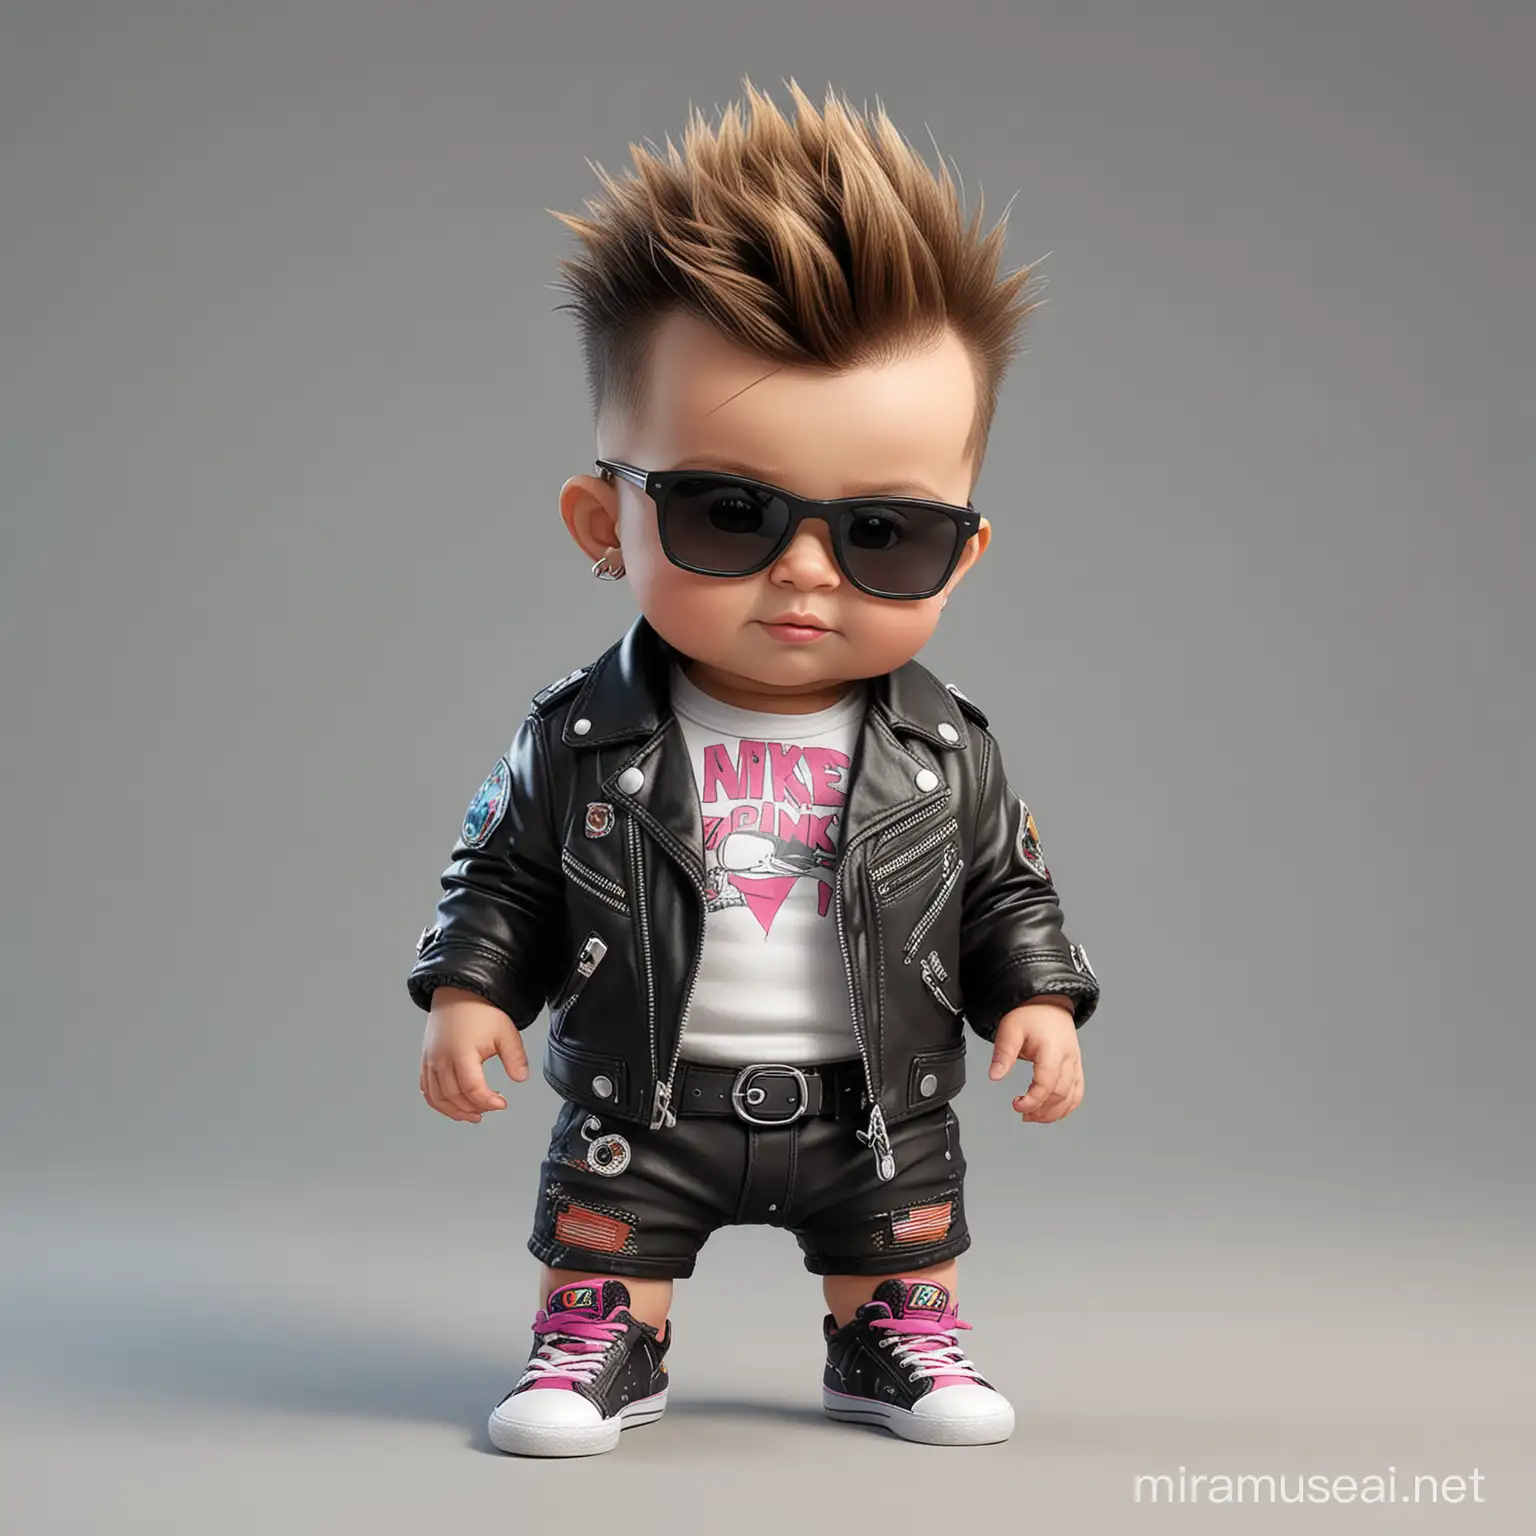 Adorable Cartoon Baby Punk with Sunglasses and Colored Crest in Leather Jacket and Nike Sneakers